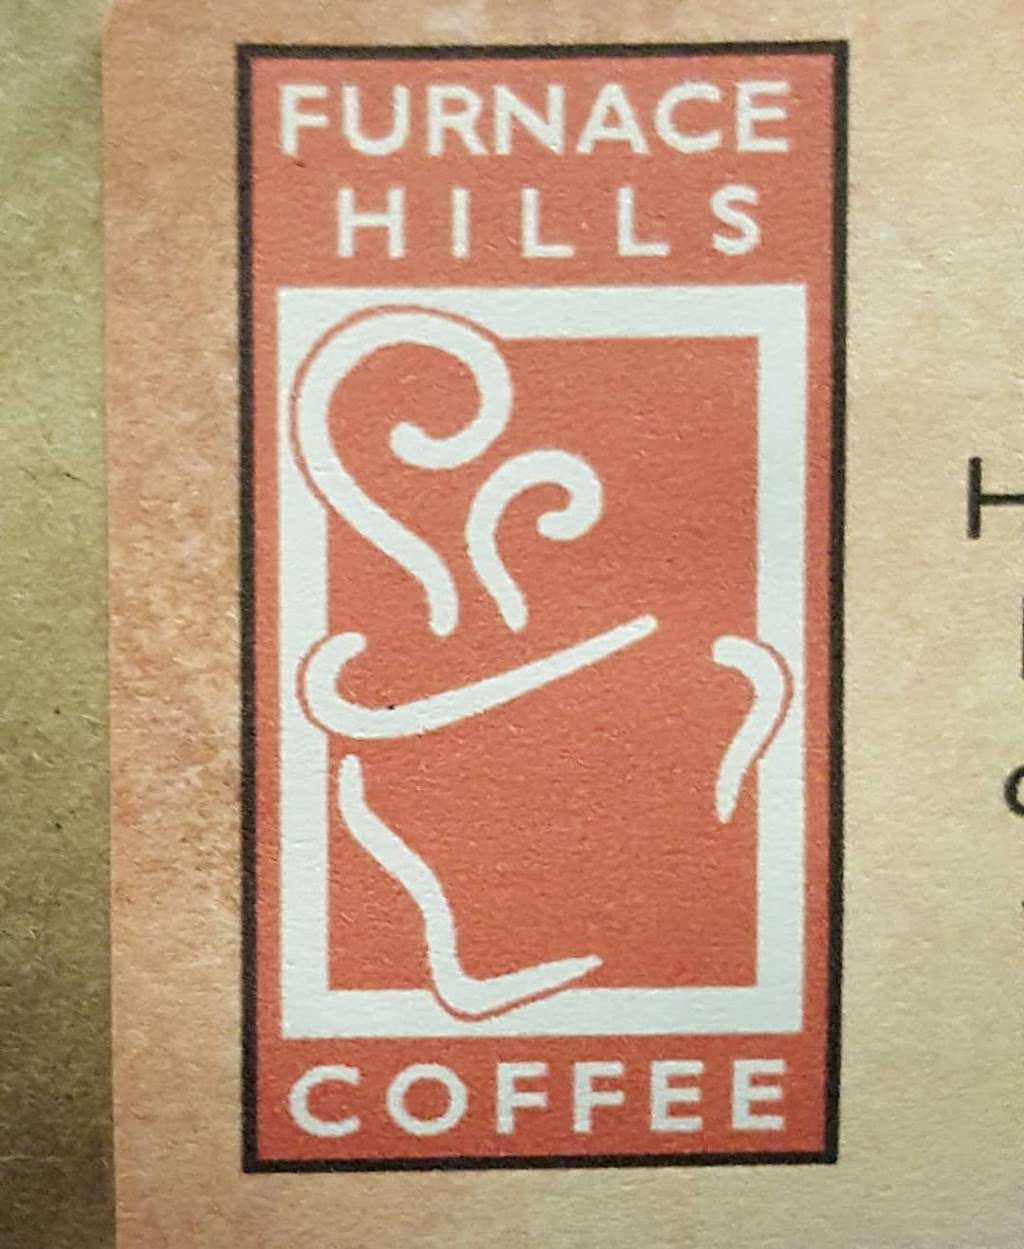 Furnace Hills Coffee | 71 W Main St, Westminster, MD 21158 | Phone: (443) 789-9599